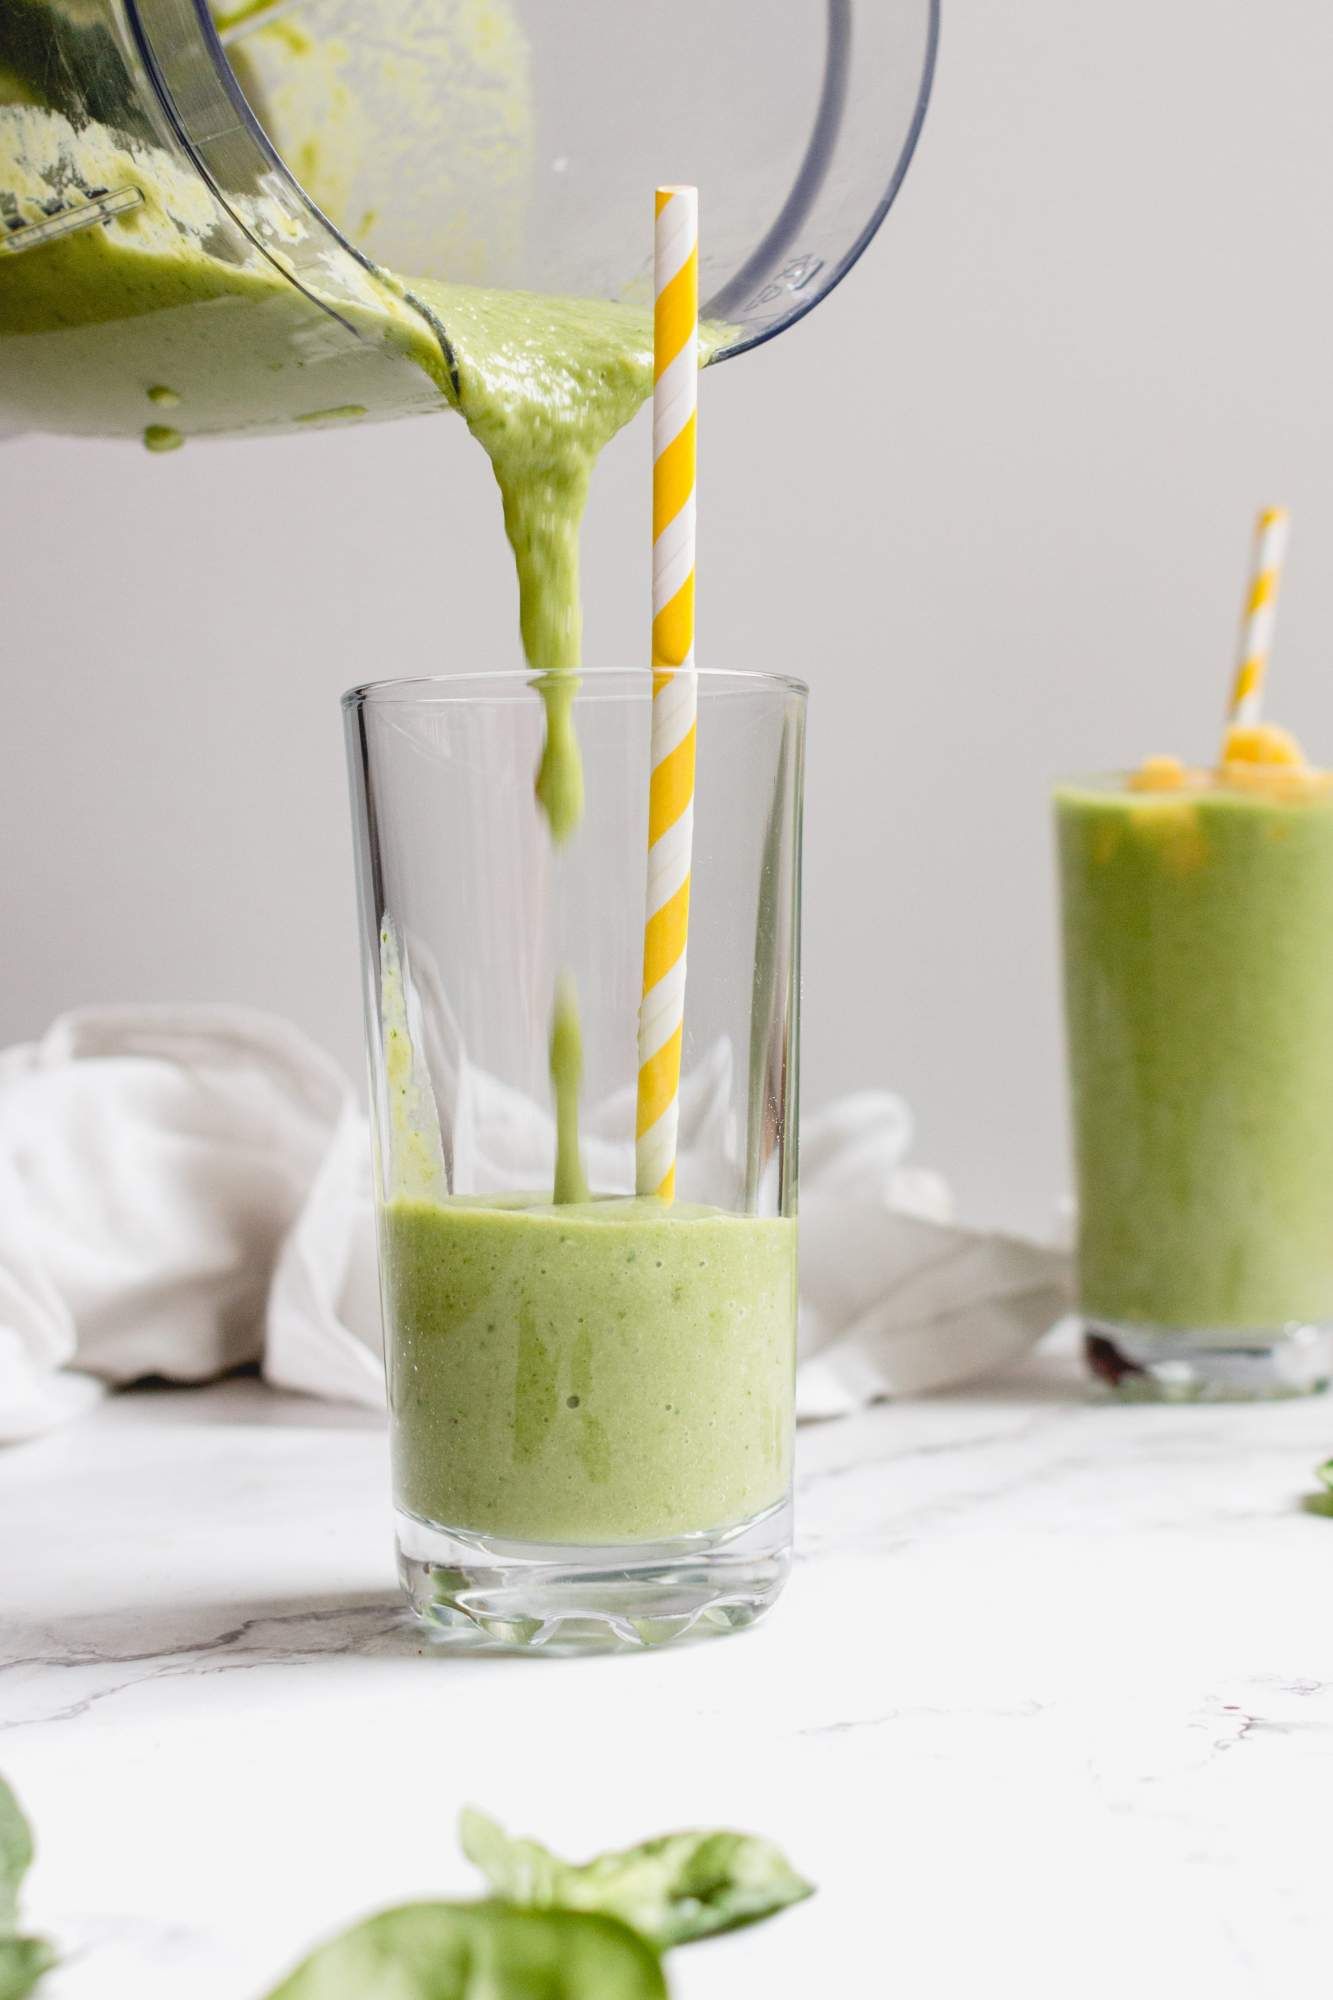 Mango green smoothie with spinach being poured from a blender into a glass with a yellow straw.